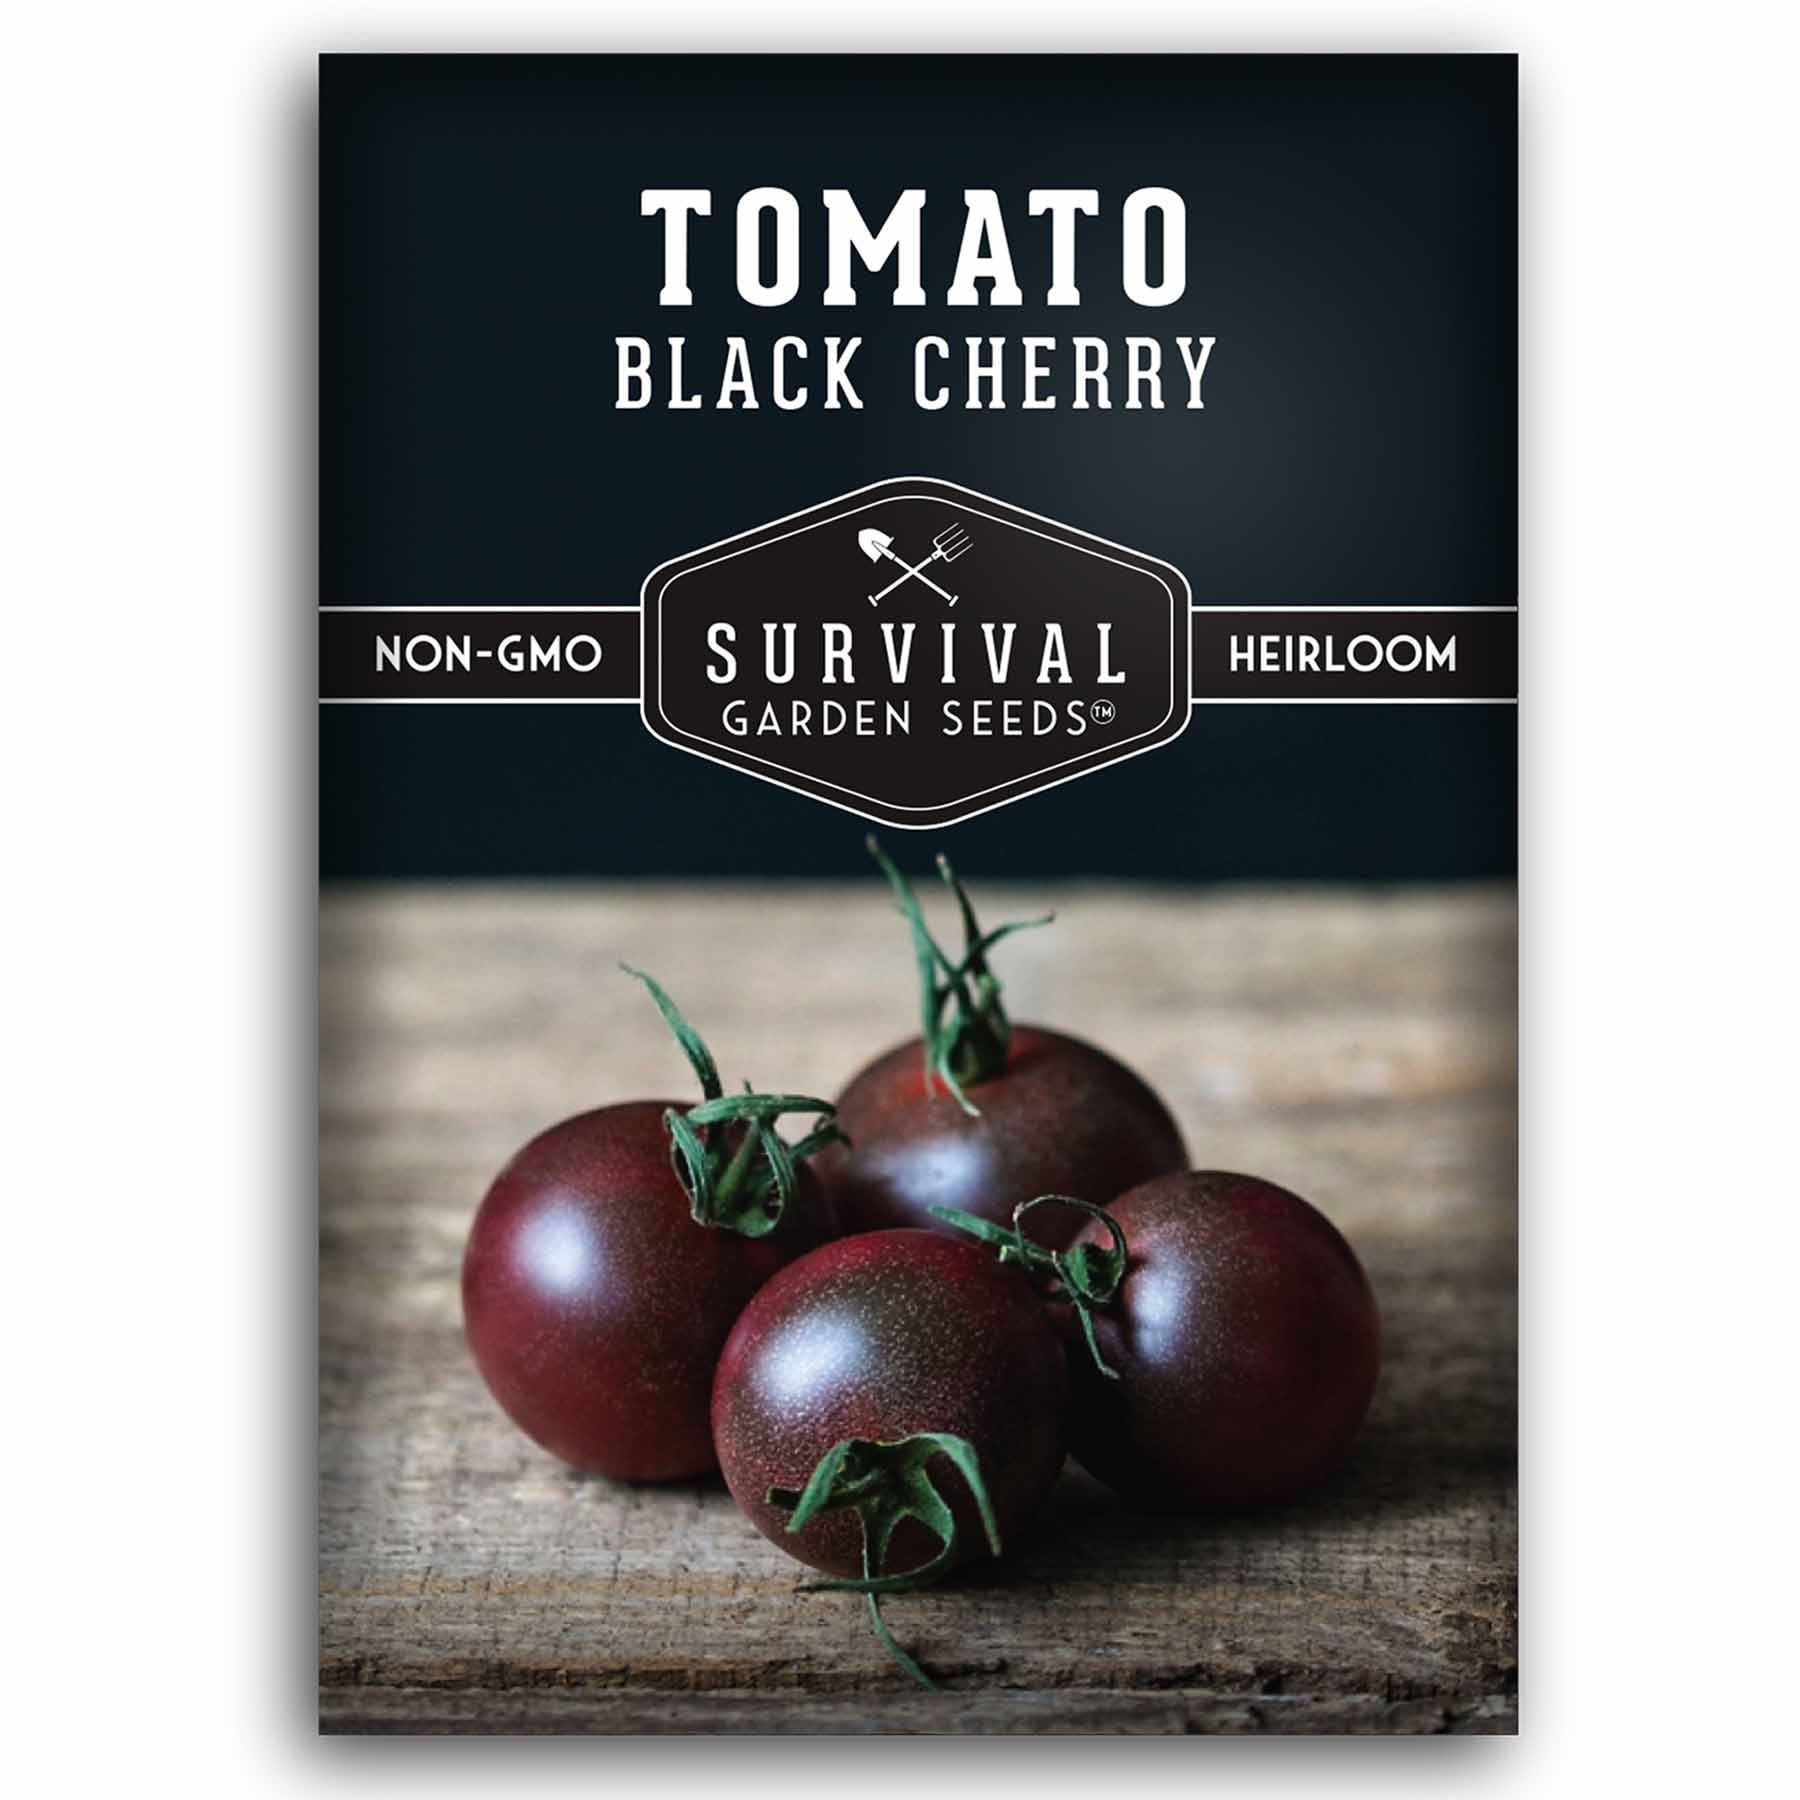 1 packet of Black Cherry Tomato seeds